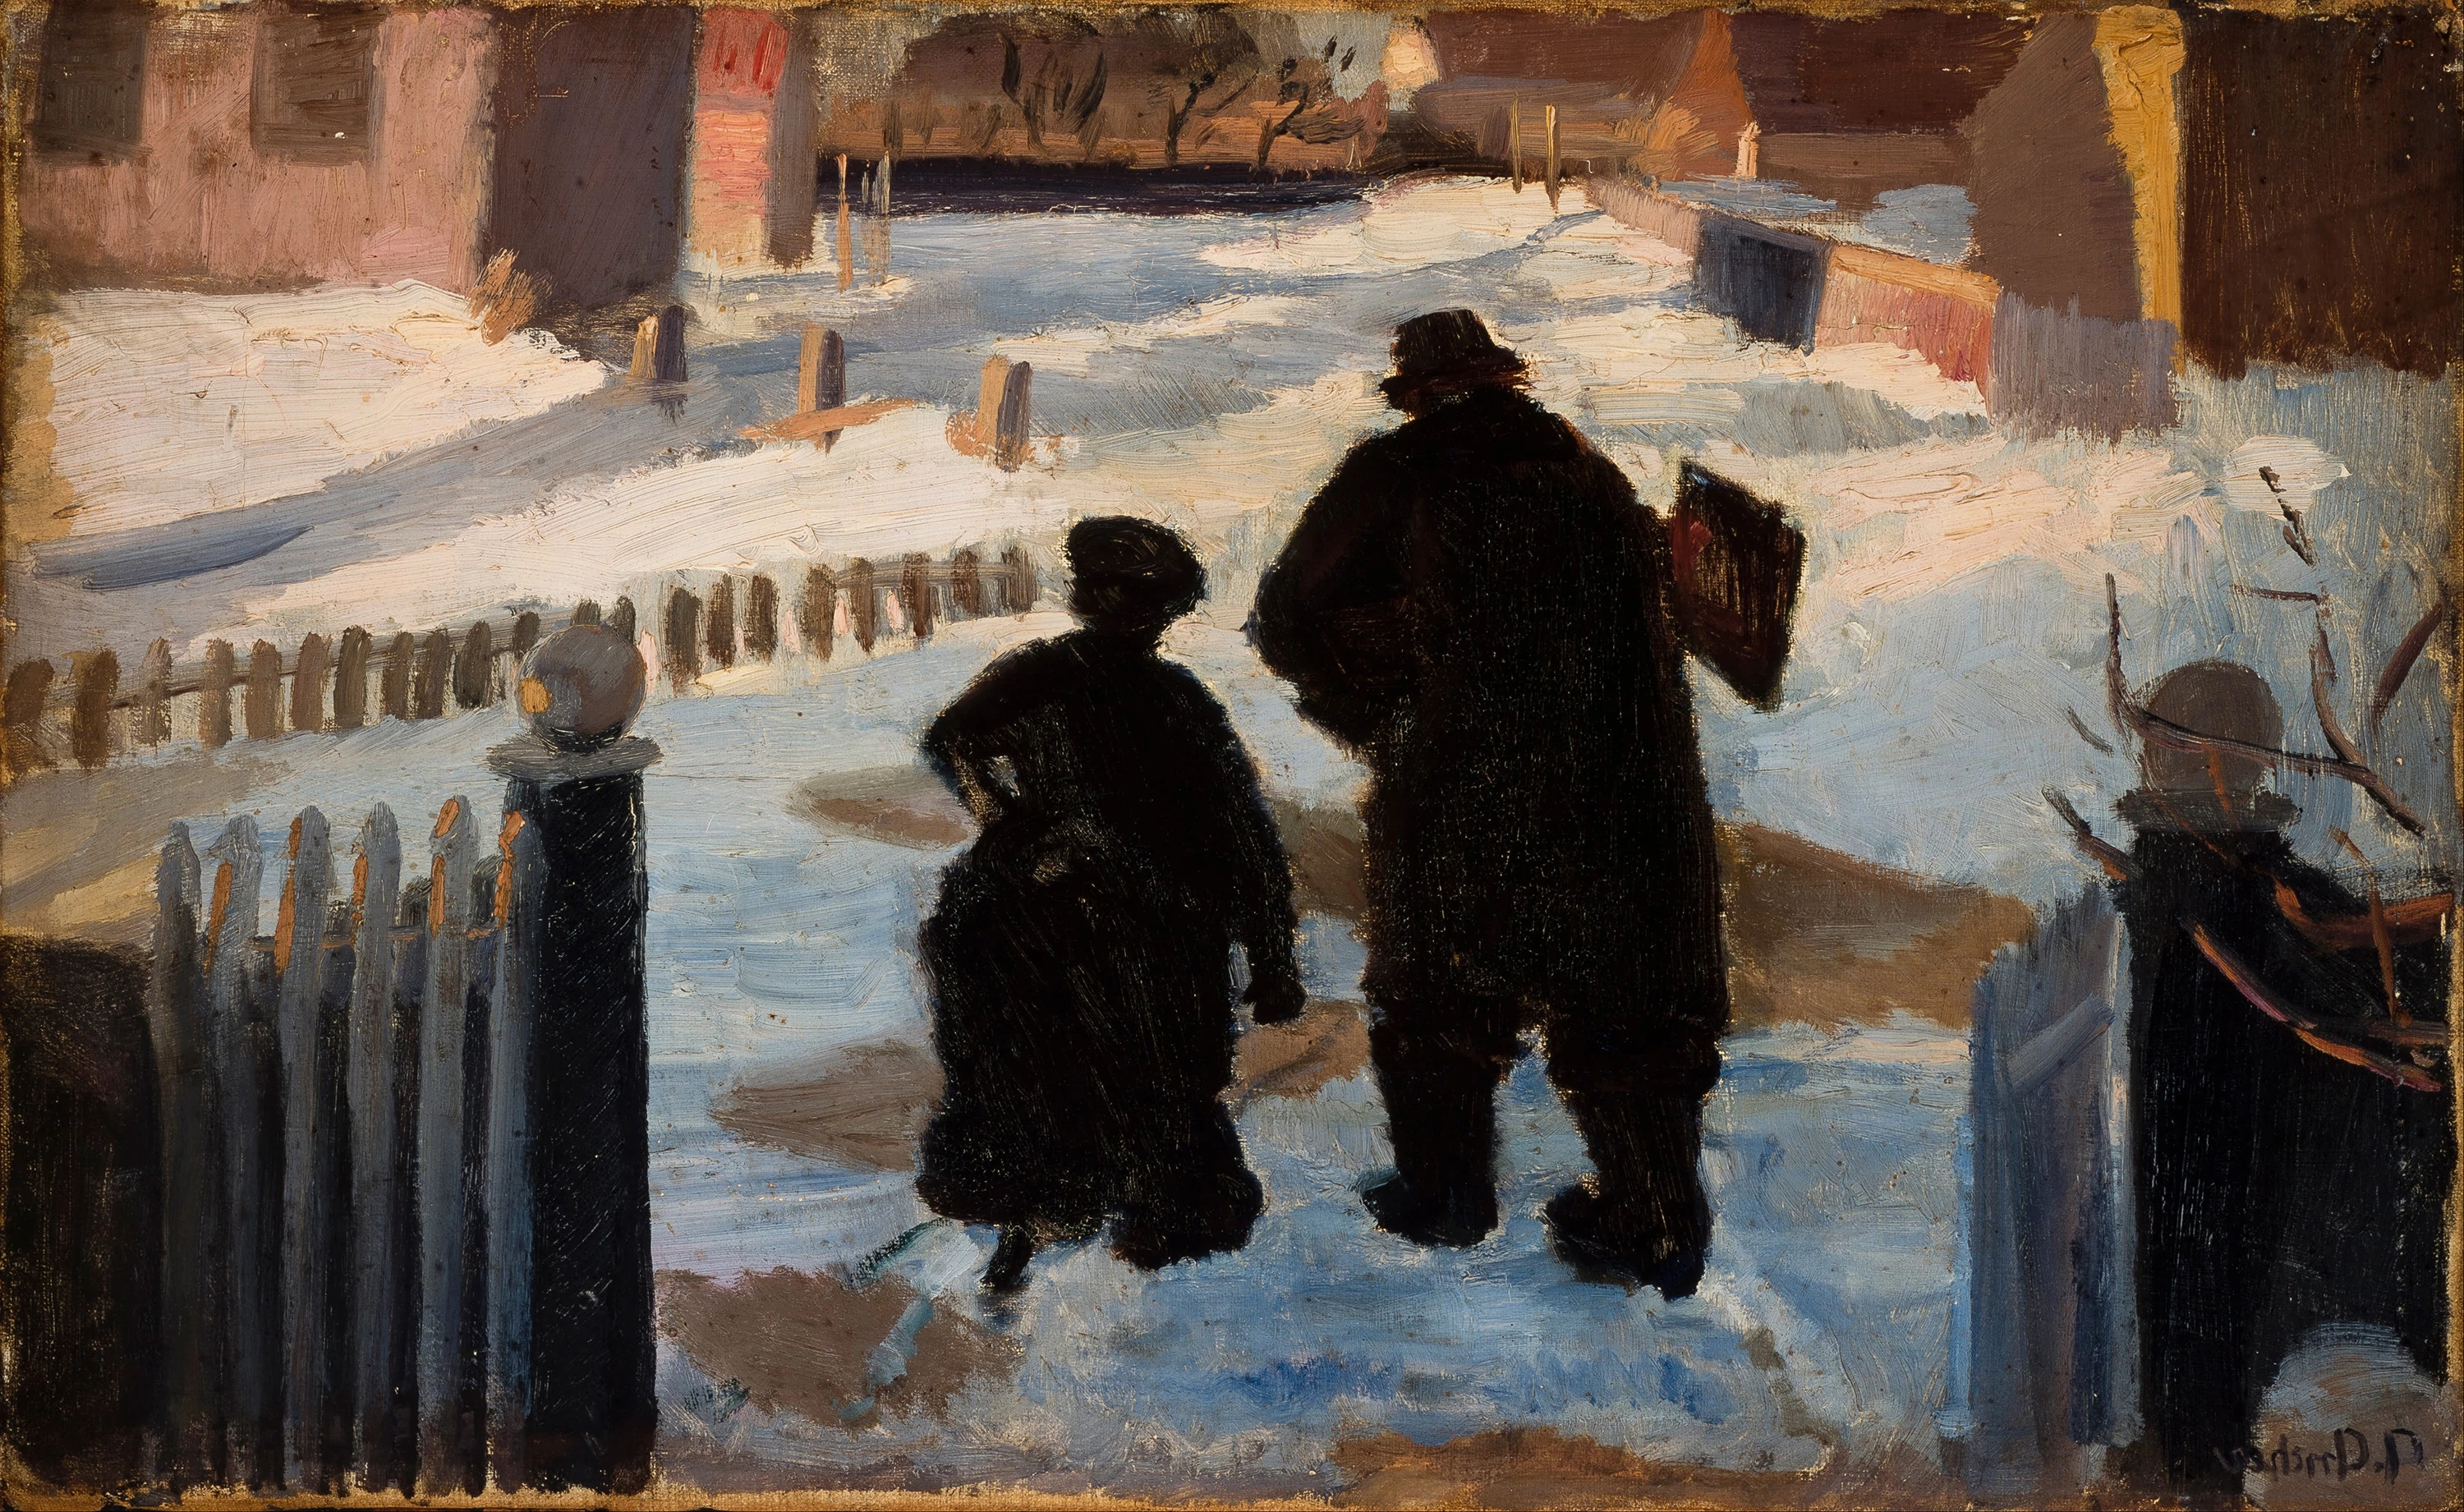 Michael Ancher on his way to his studio accompanied by the organist Helene Christensen, Anna Ancher